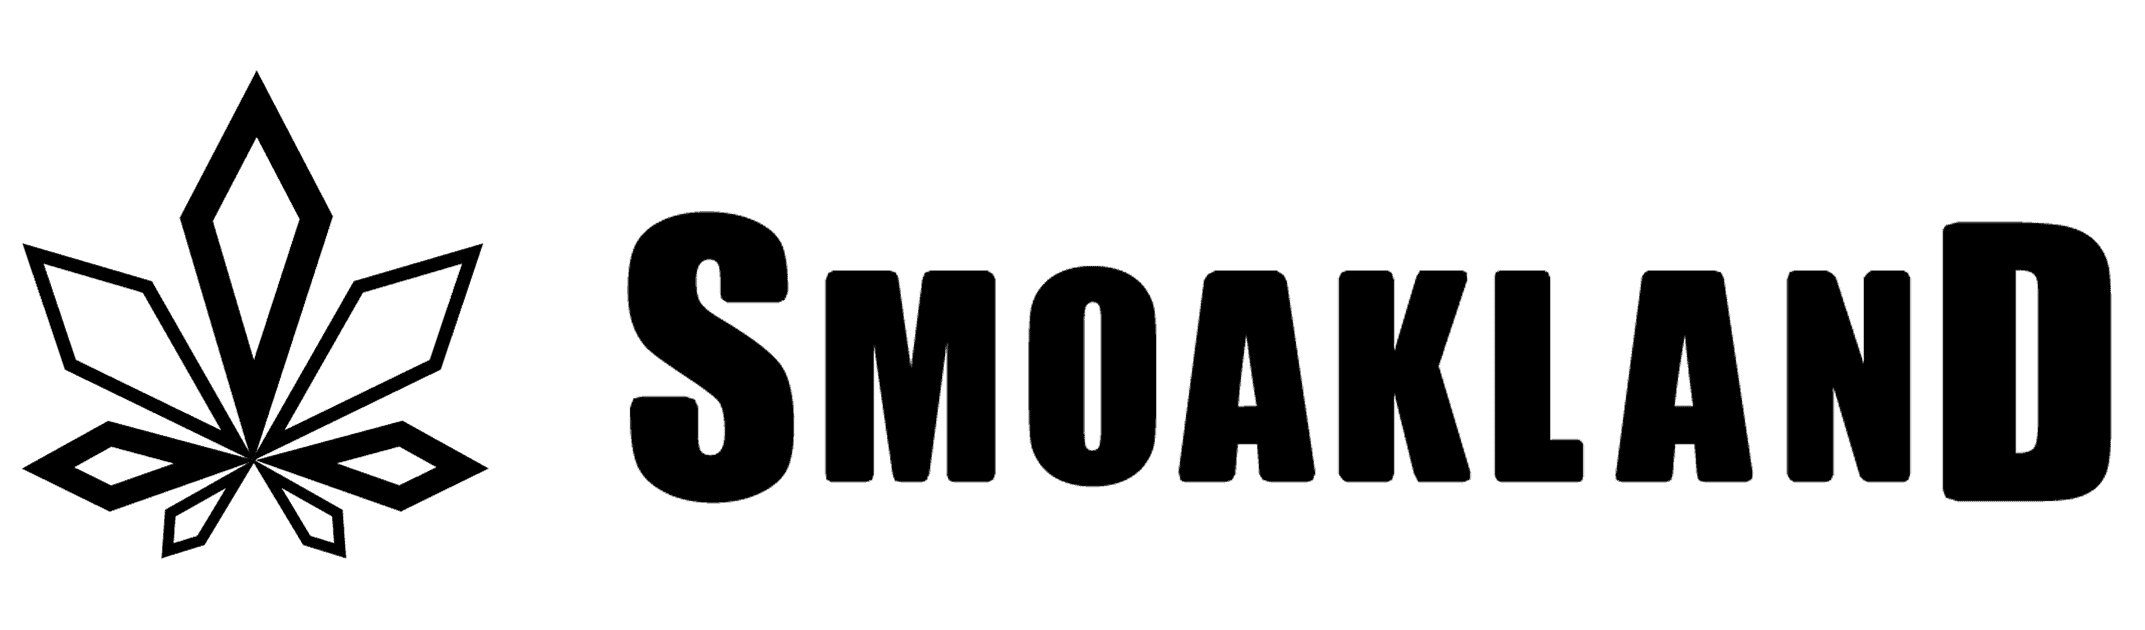 Smoakland Weed Delivery logo